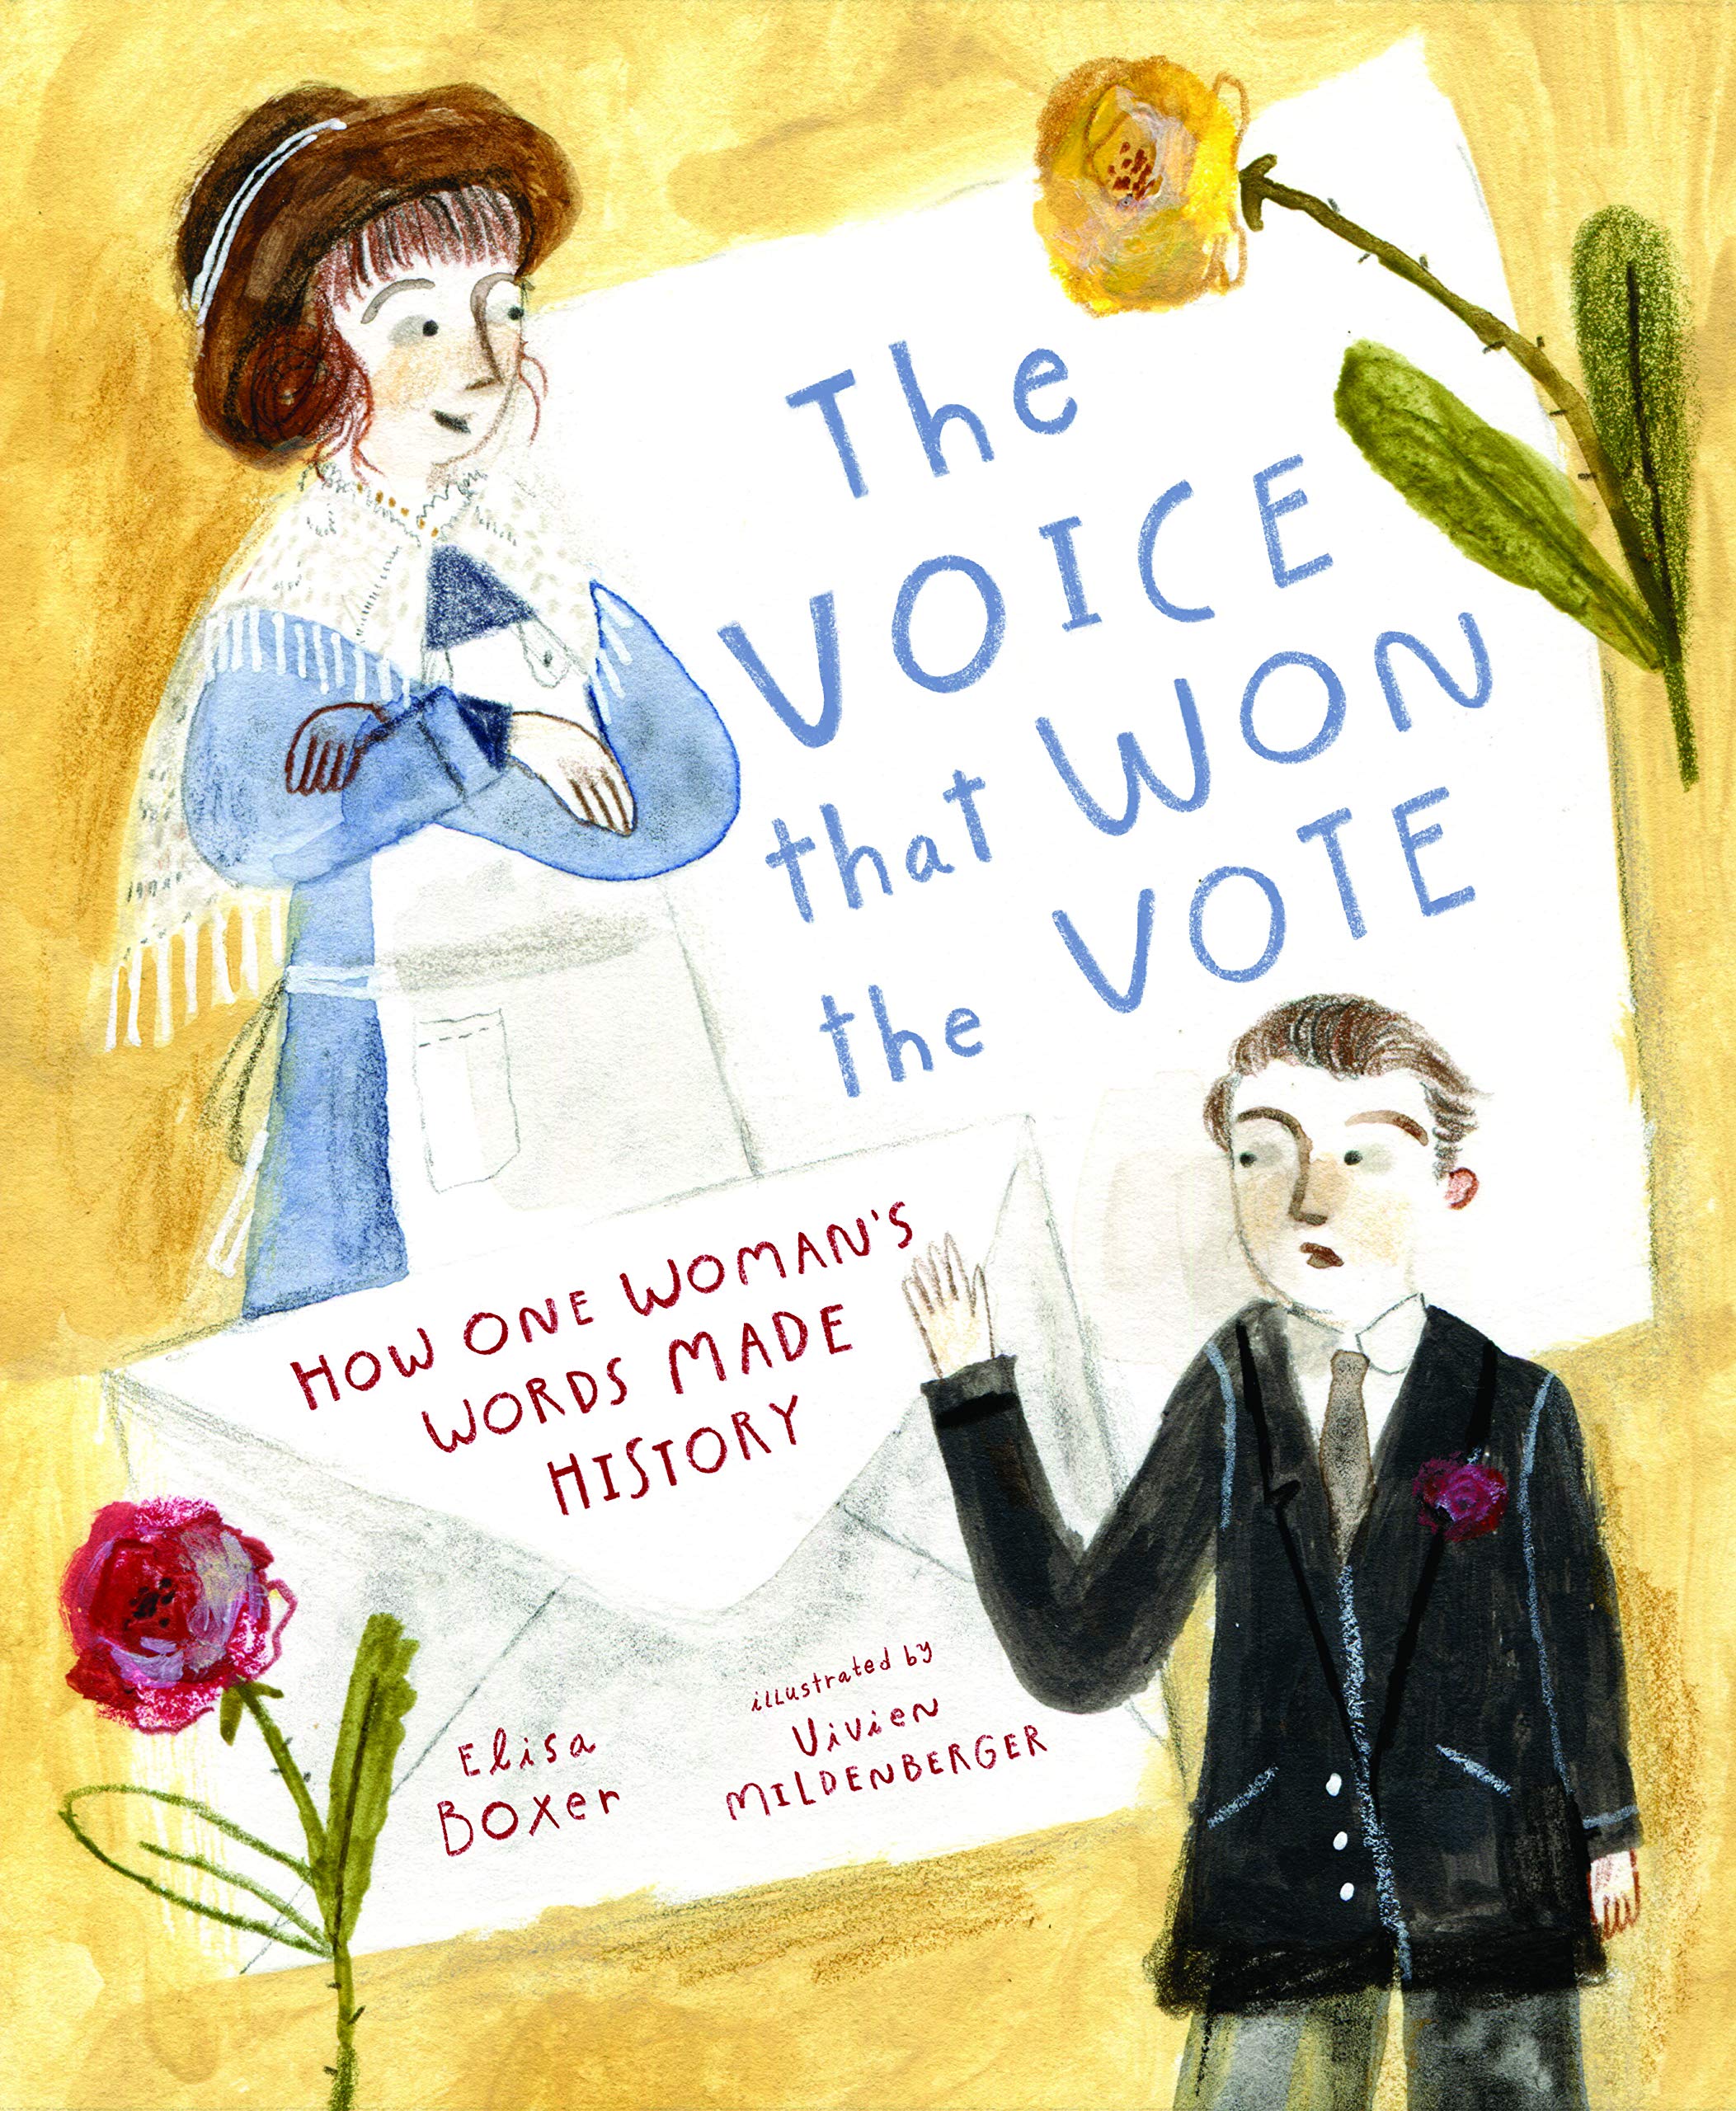 The Voice that Won the Vote: How One Woman's Words Made History